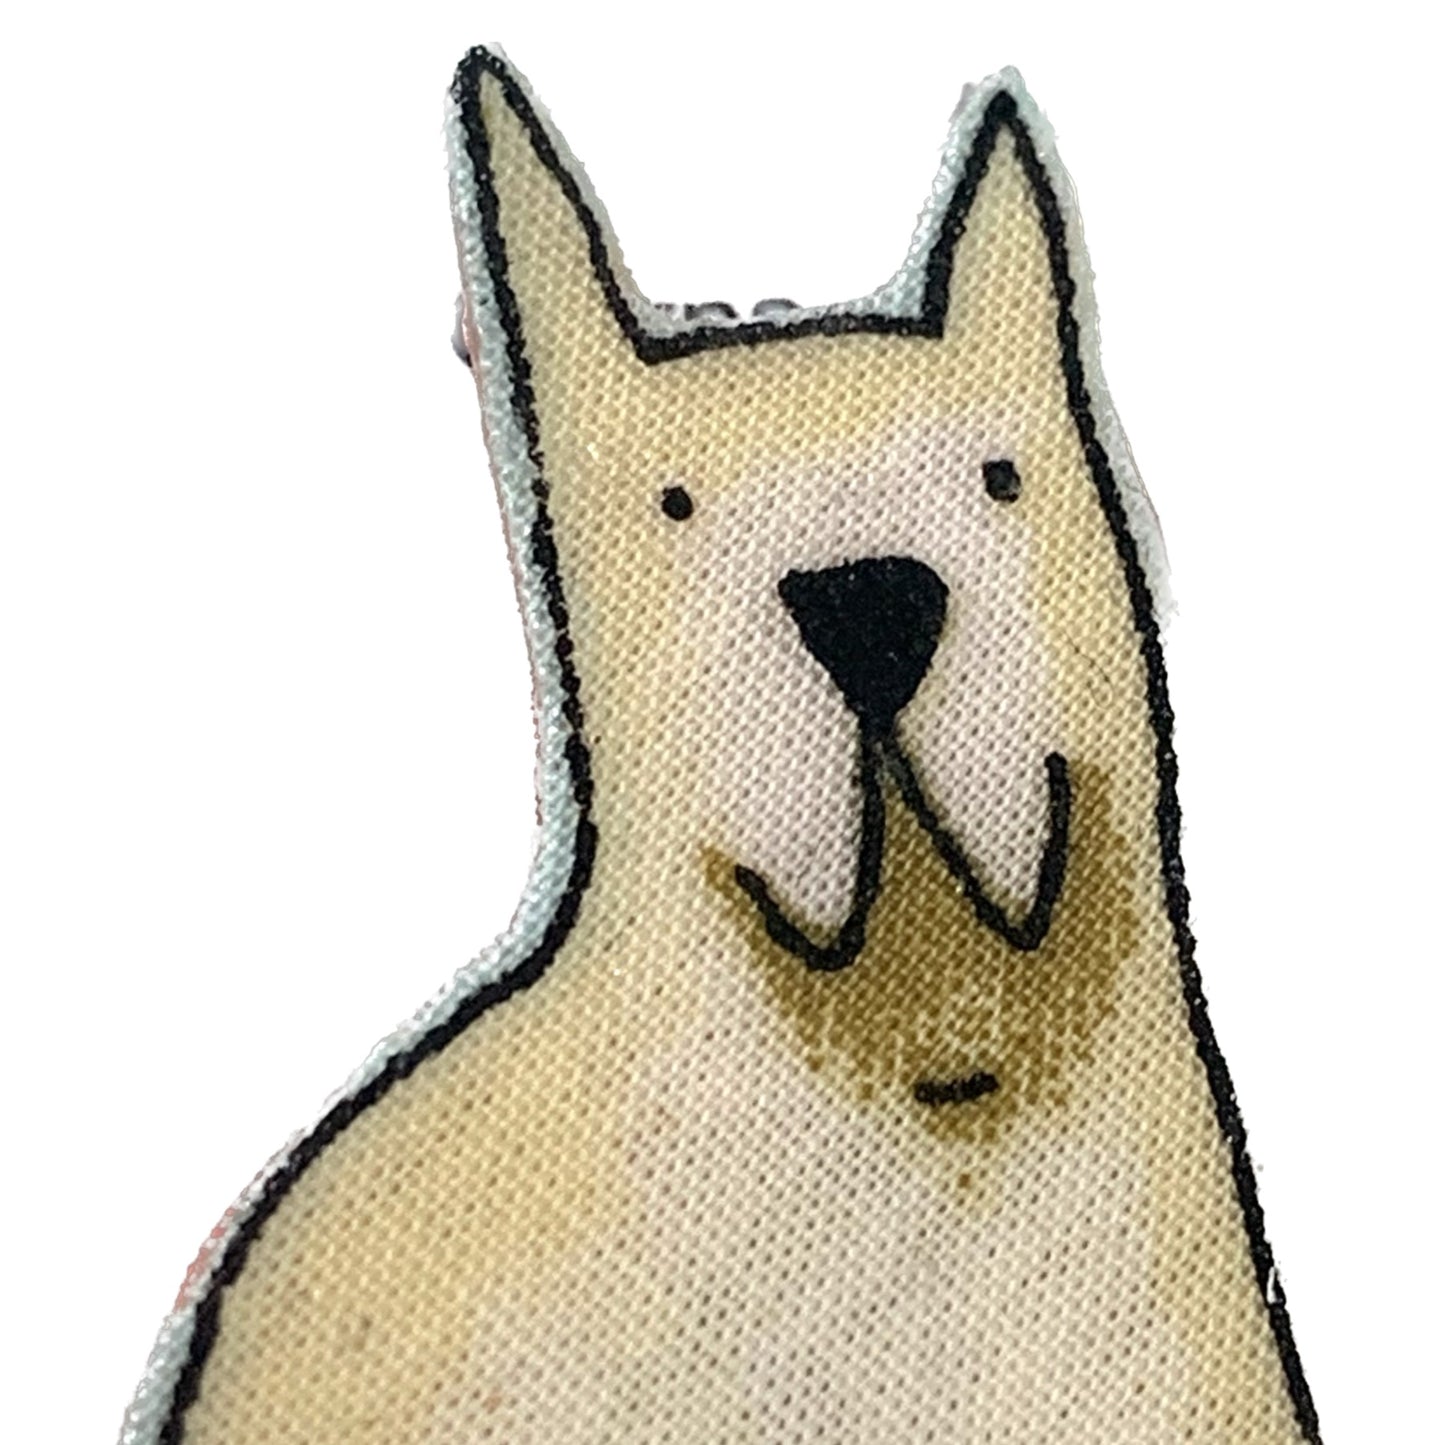 THIS BIRD HAS FLOWN- Fabric Remnant Brooches- Shaggy Tailed White Dog